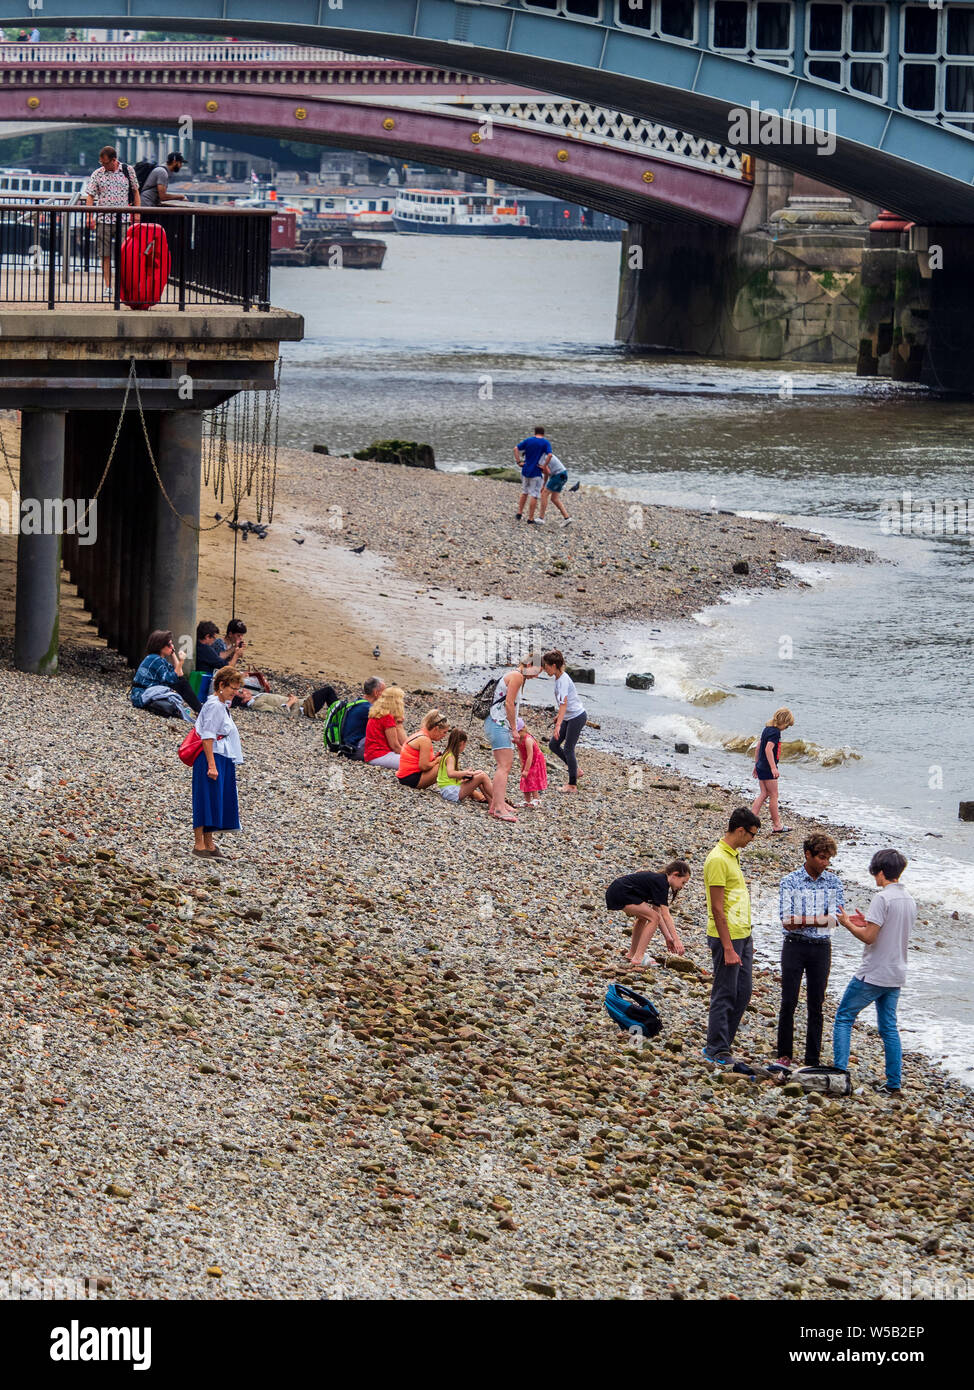 London Thames Beach - people relax on the banks of the River Thames at low tide in Central London during hot weather Stock Photo